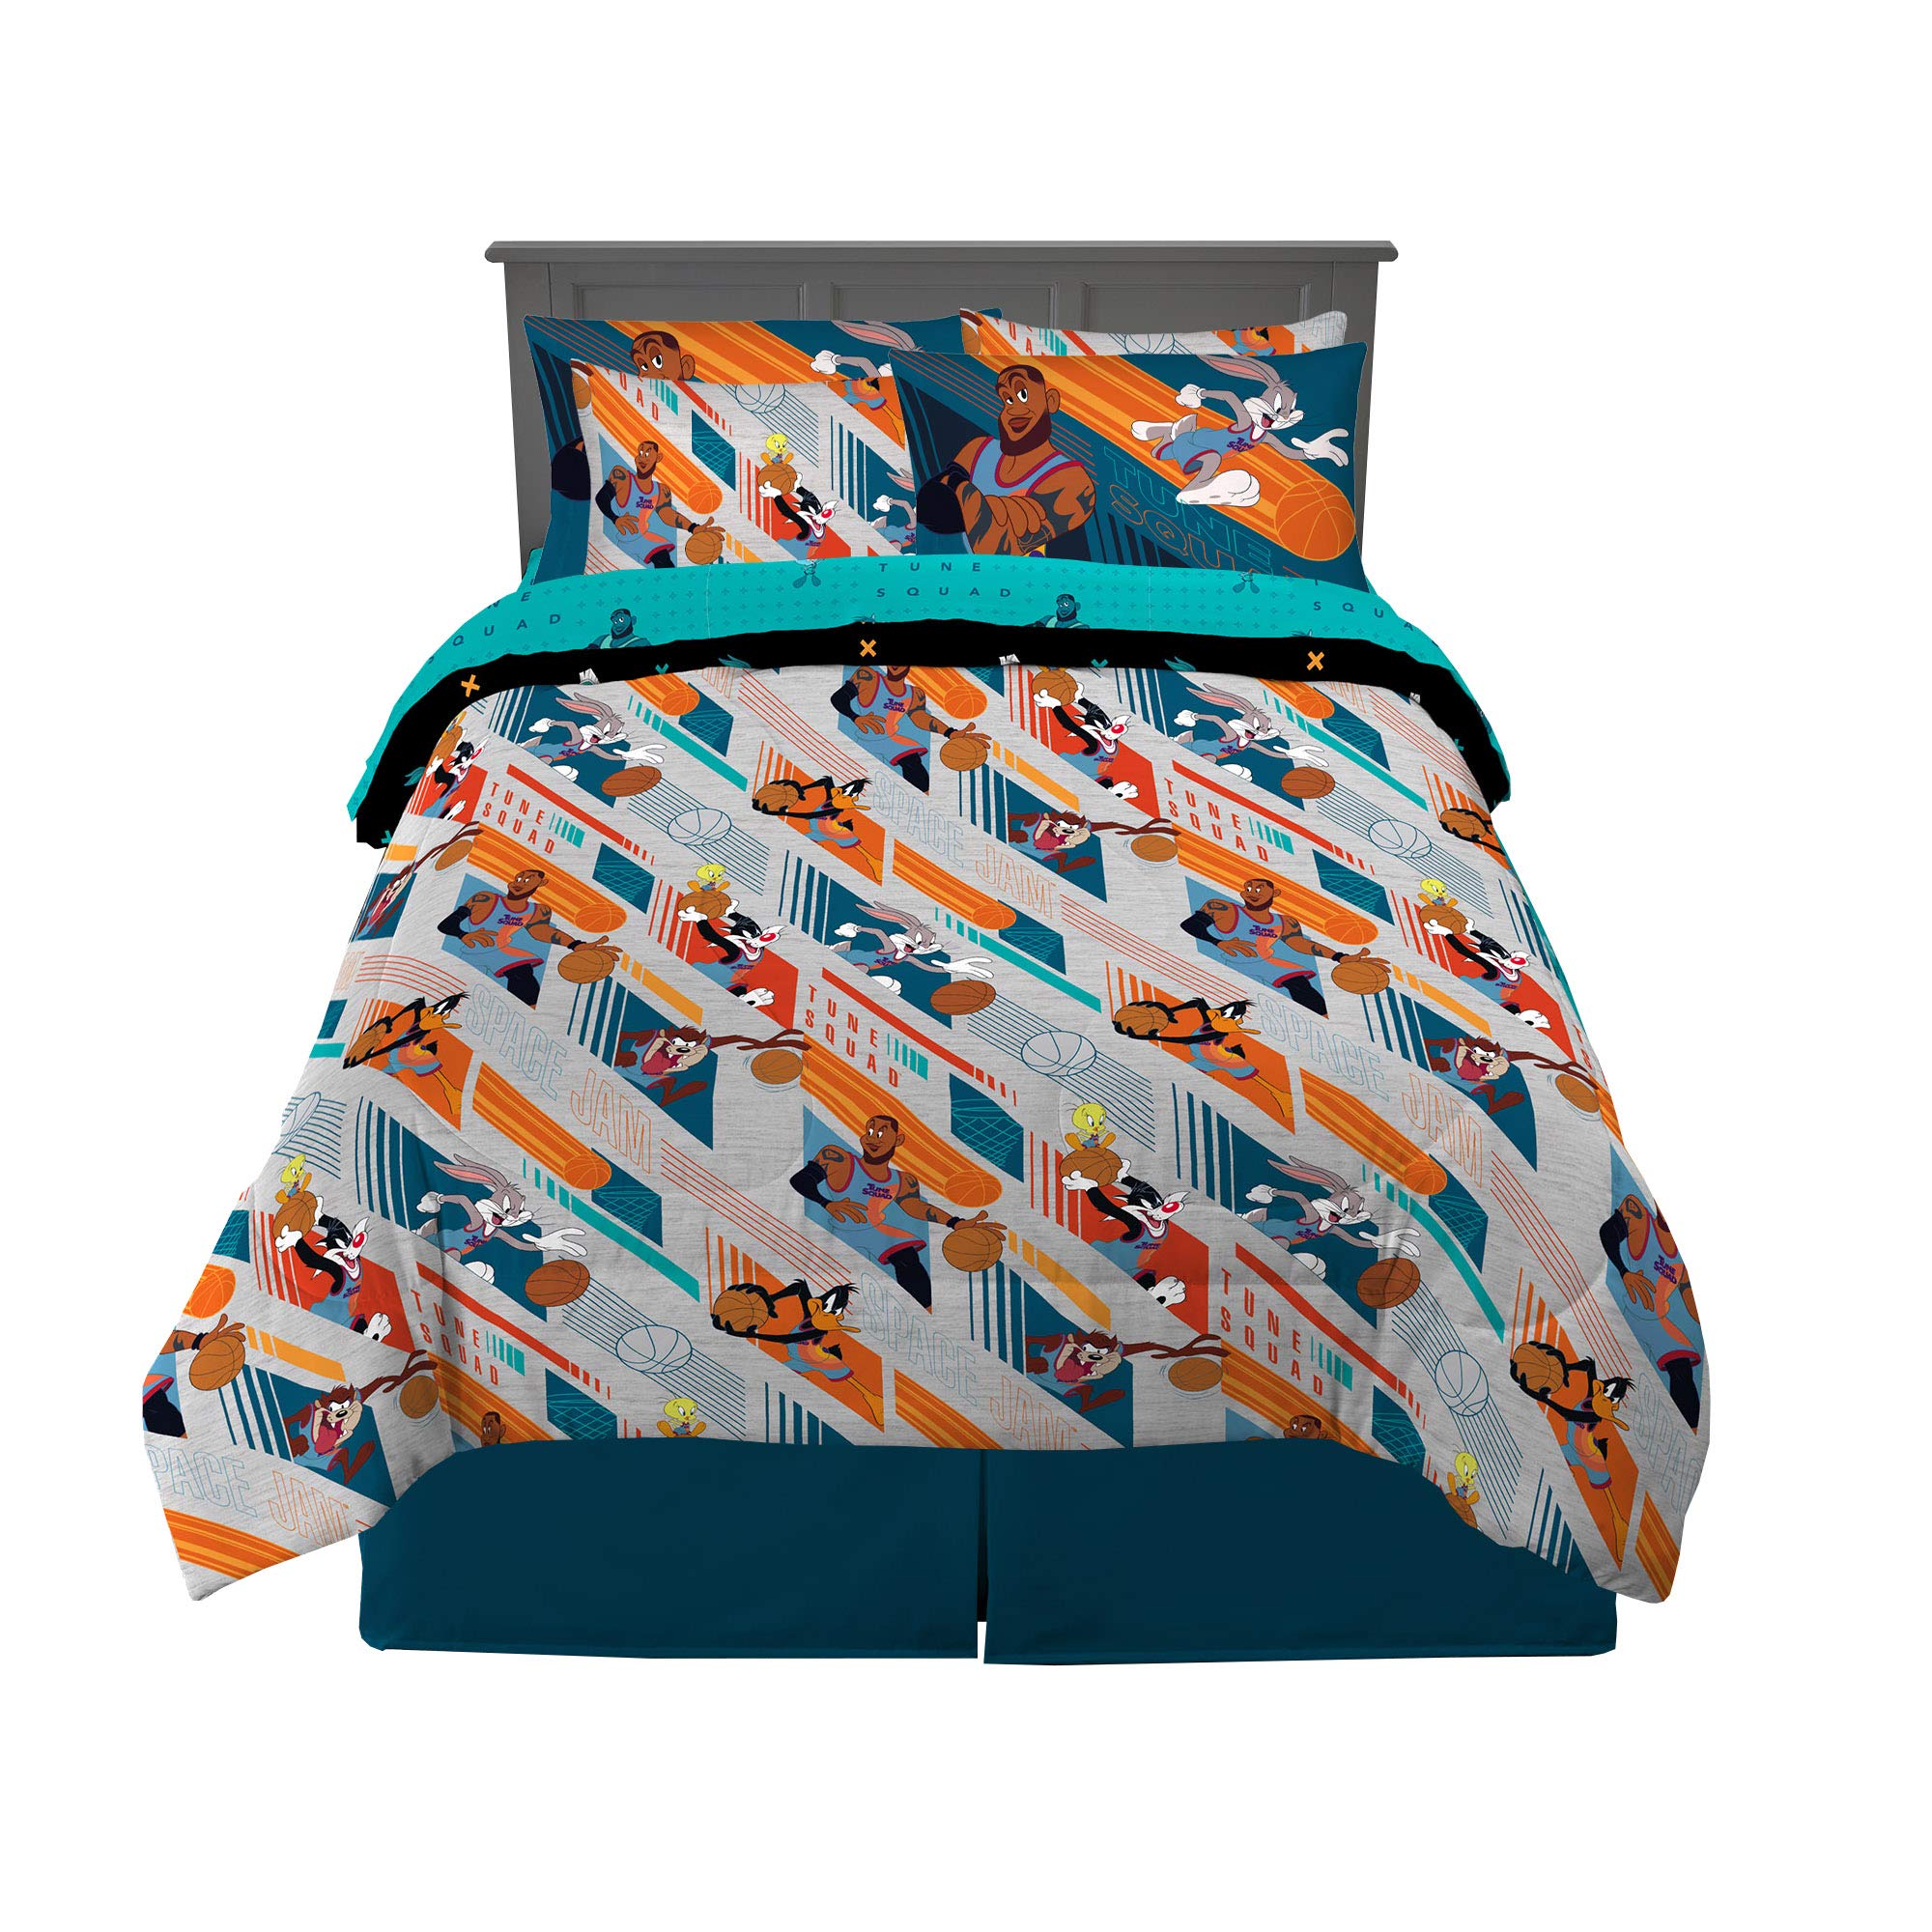 Franco Kids Bedding Super Soft Comforter and Sheet Set with Sham, 7 Piece Full Size, Space Jam 2 A New Legacy